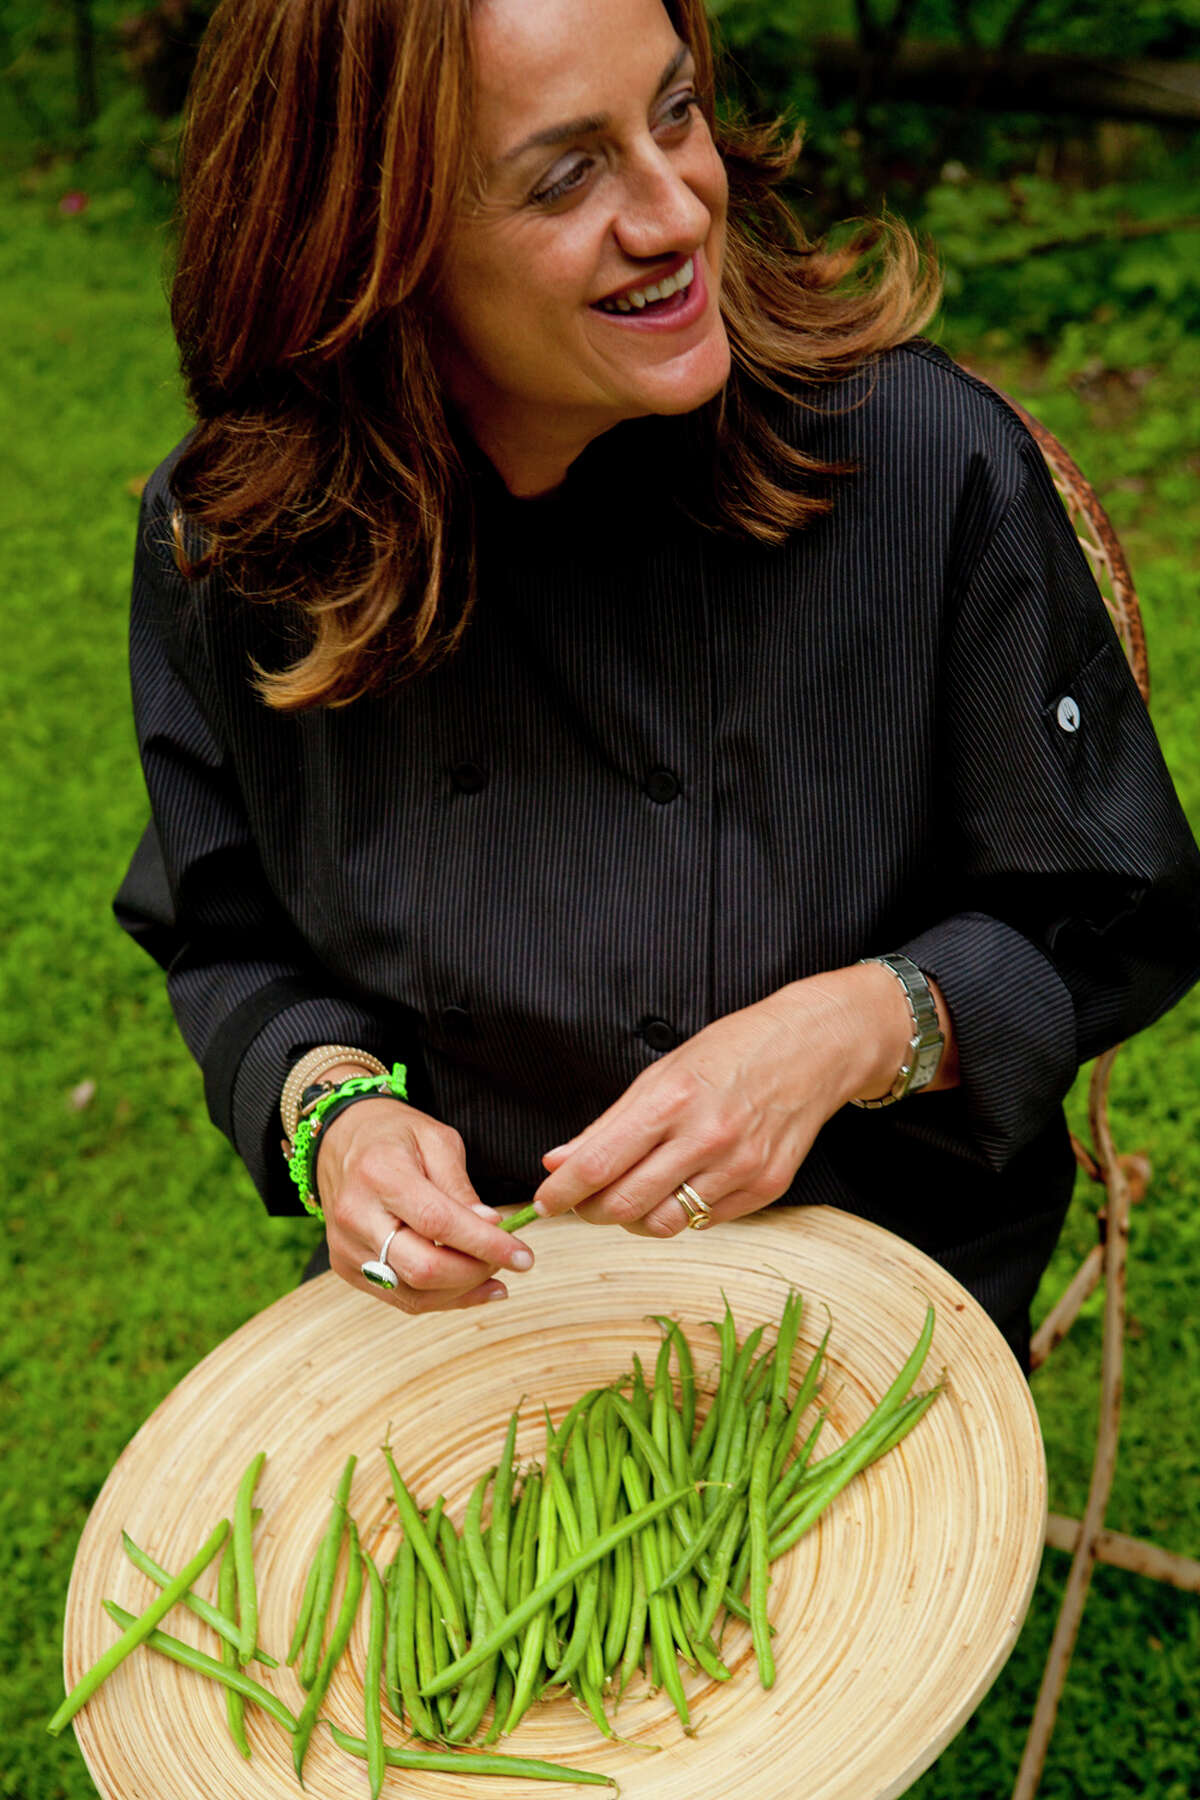 Chef Silvia Baldini of New Canaan, Conn., will be among the demonstrators at the Sustainable Food & Farm Expo 2015 on Sunday, May 31, 2015, at Audubon Greenwich in Greenwich, Conn. Local food companies and expert gardeners will be offering tips, demonstrations and tastings.